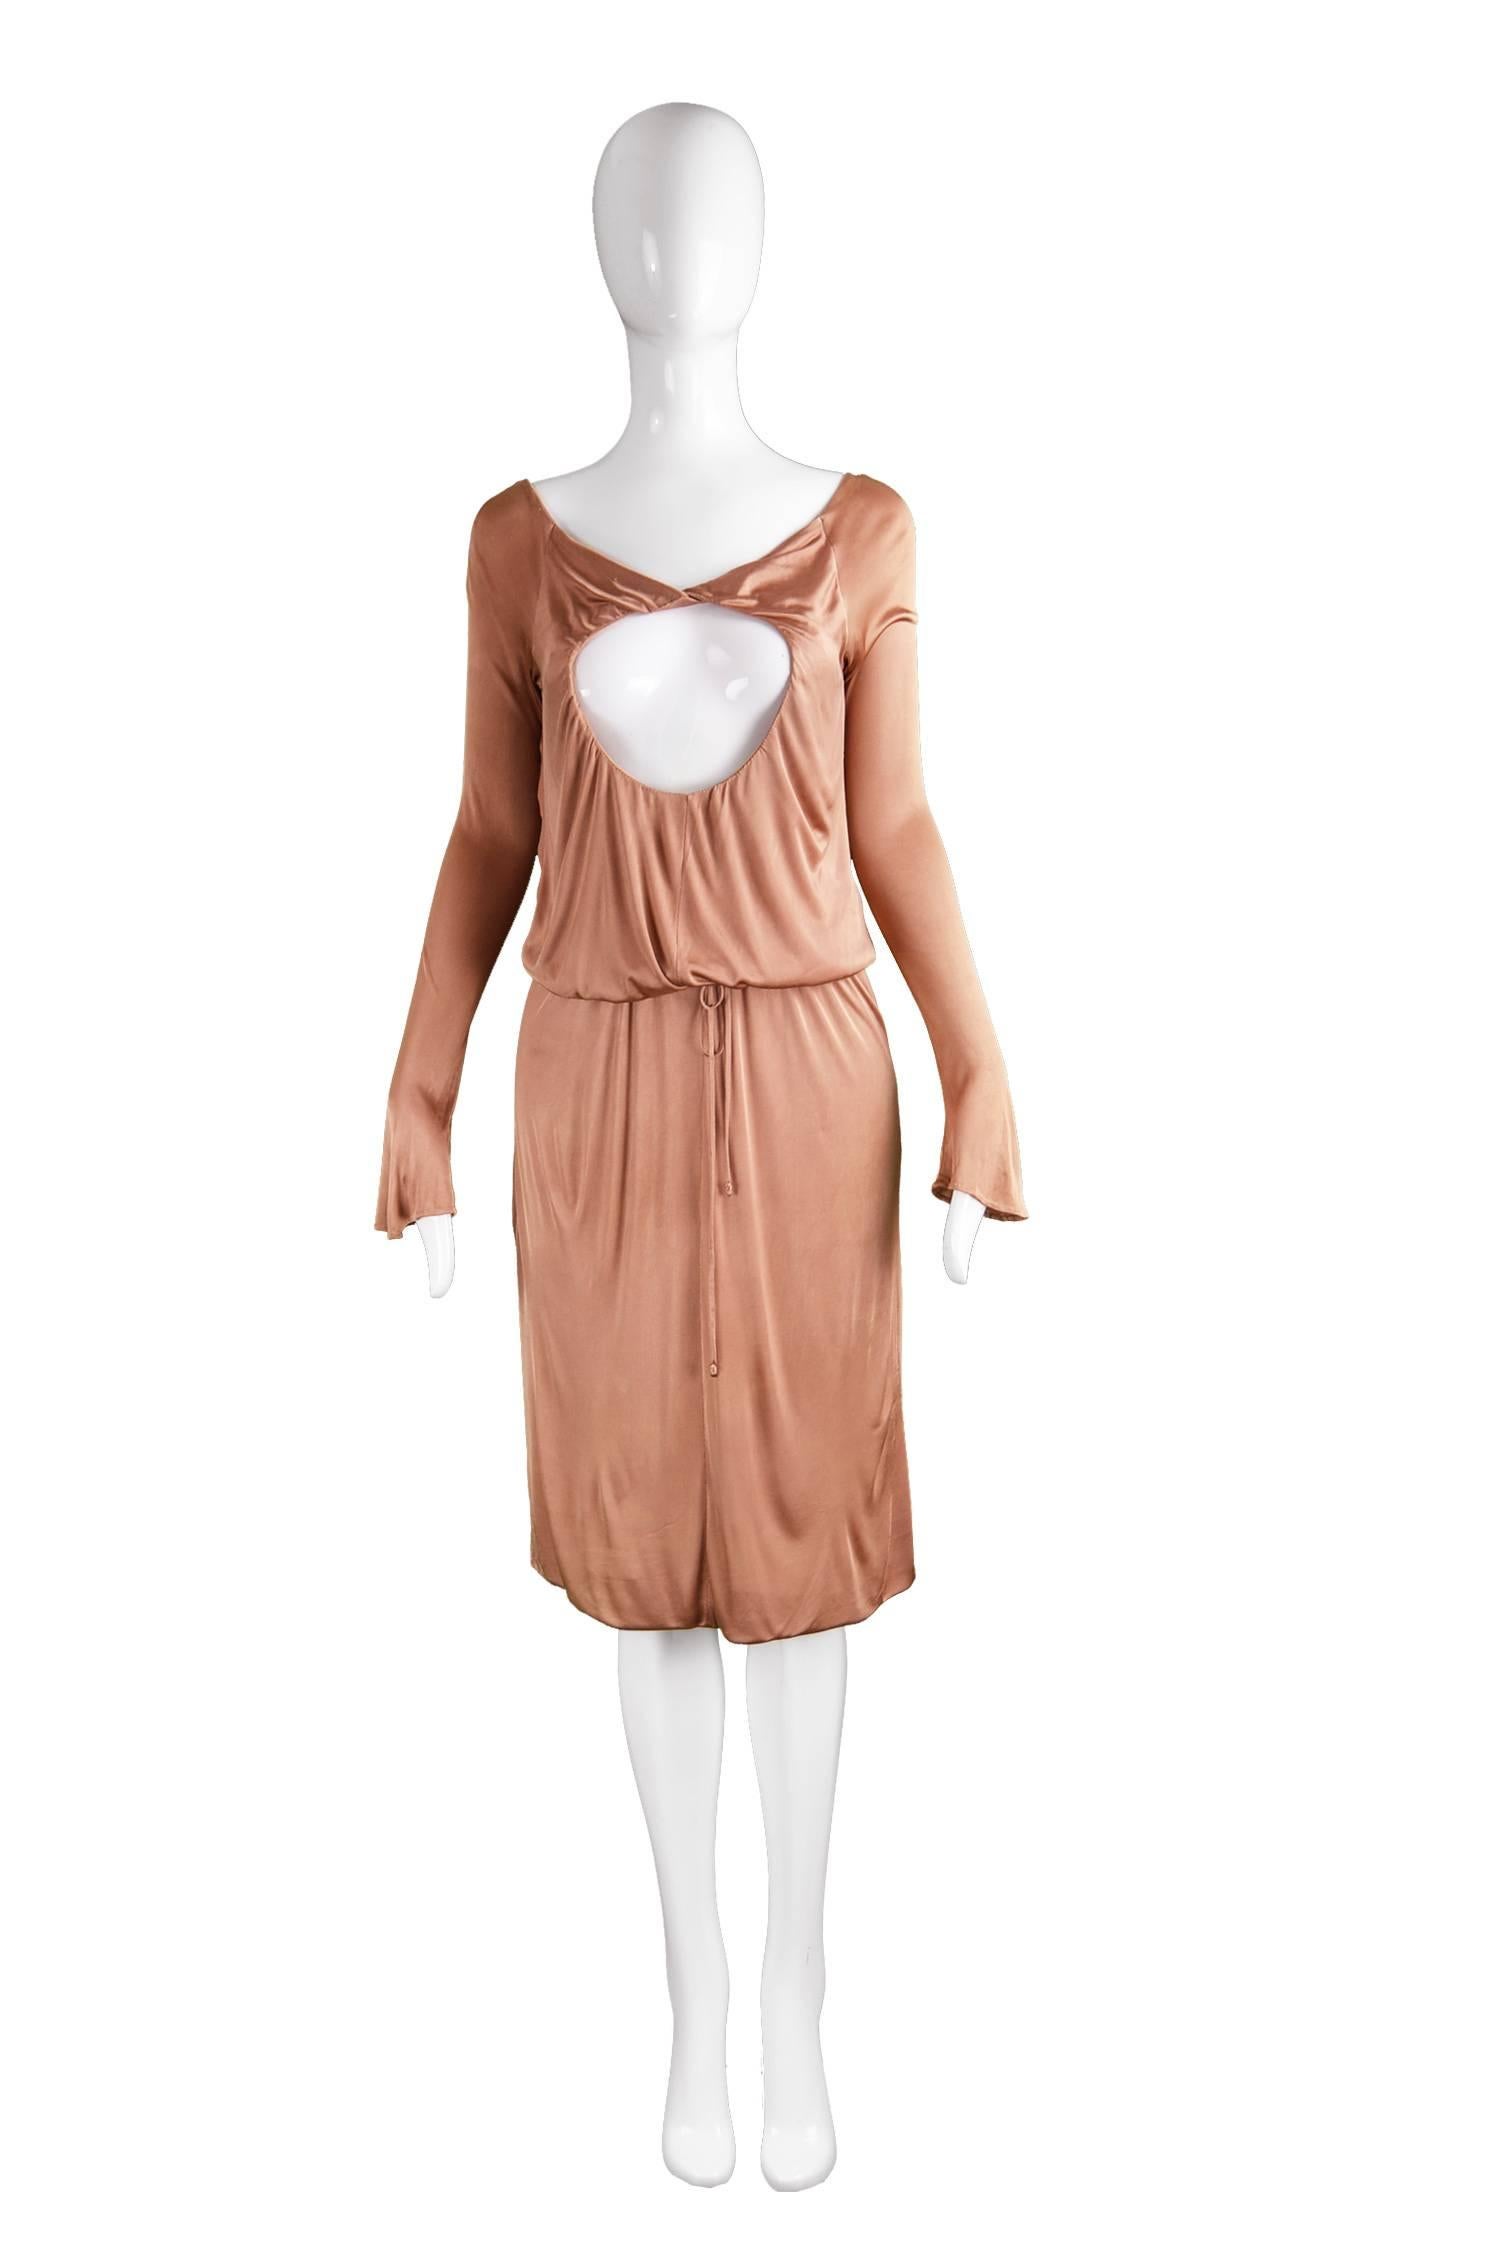 Alexander McQueen Nude Jersey 'Pantheon as Lecum' Jersey Dress, A/W 2004

Size: Marked 38 which is roughly a UK 10/ US 6. Please check measurements.
Bust - 34” / 86cm
Waist - Up to 32” / 81cm (Can be pulled in with drawstring)
Hips - 40” /